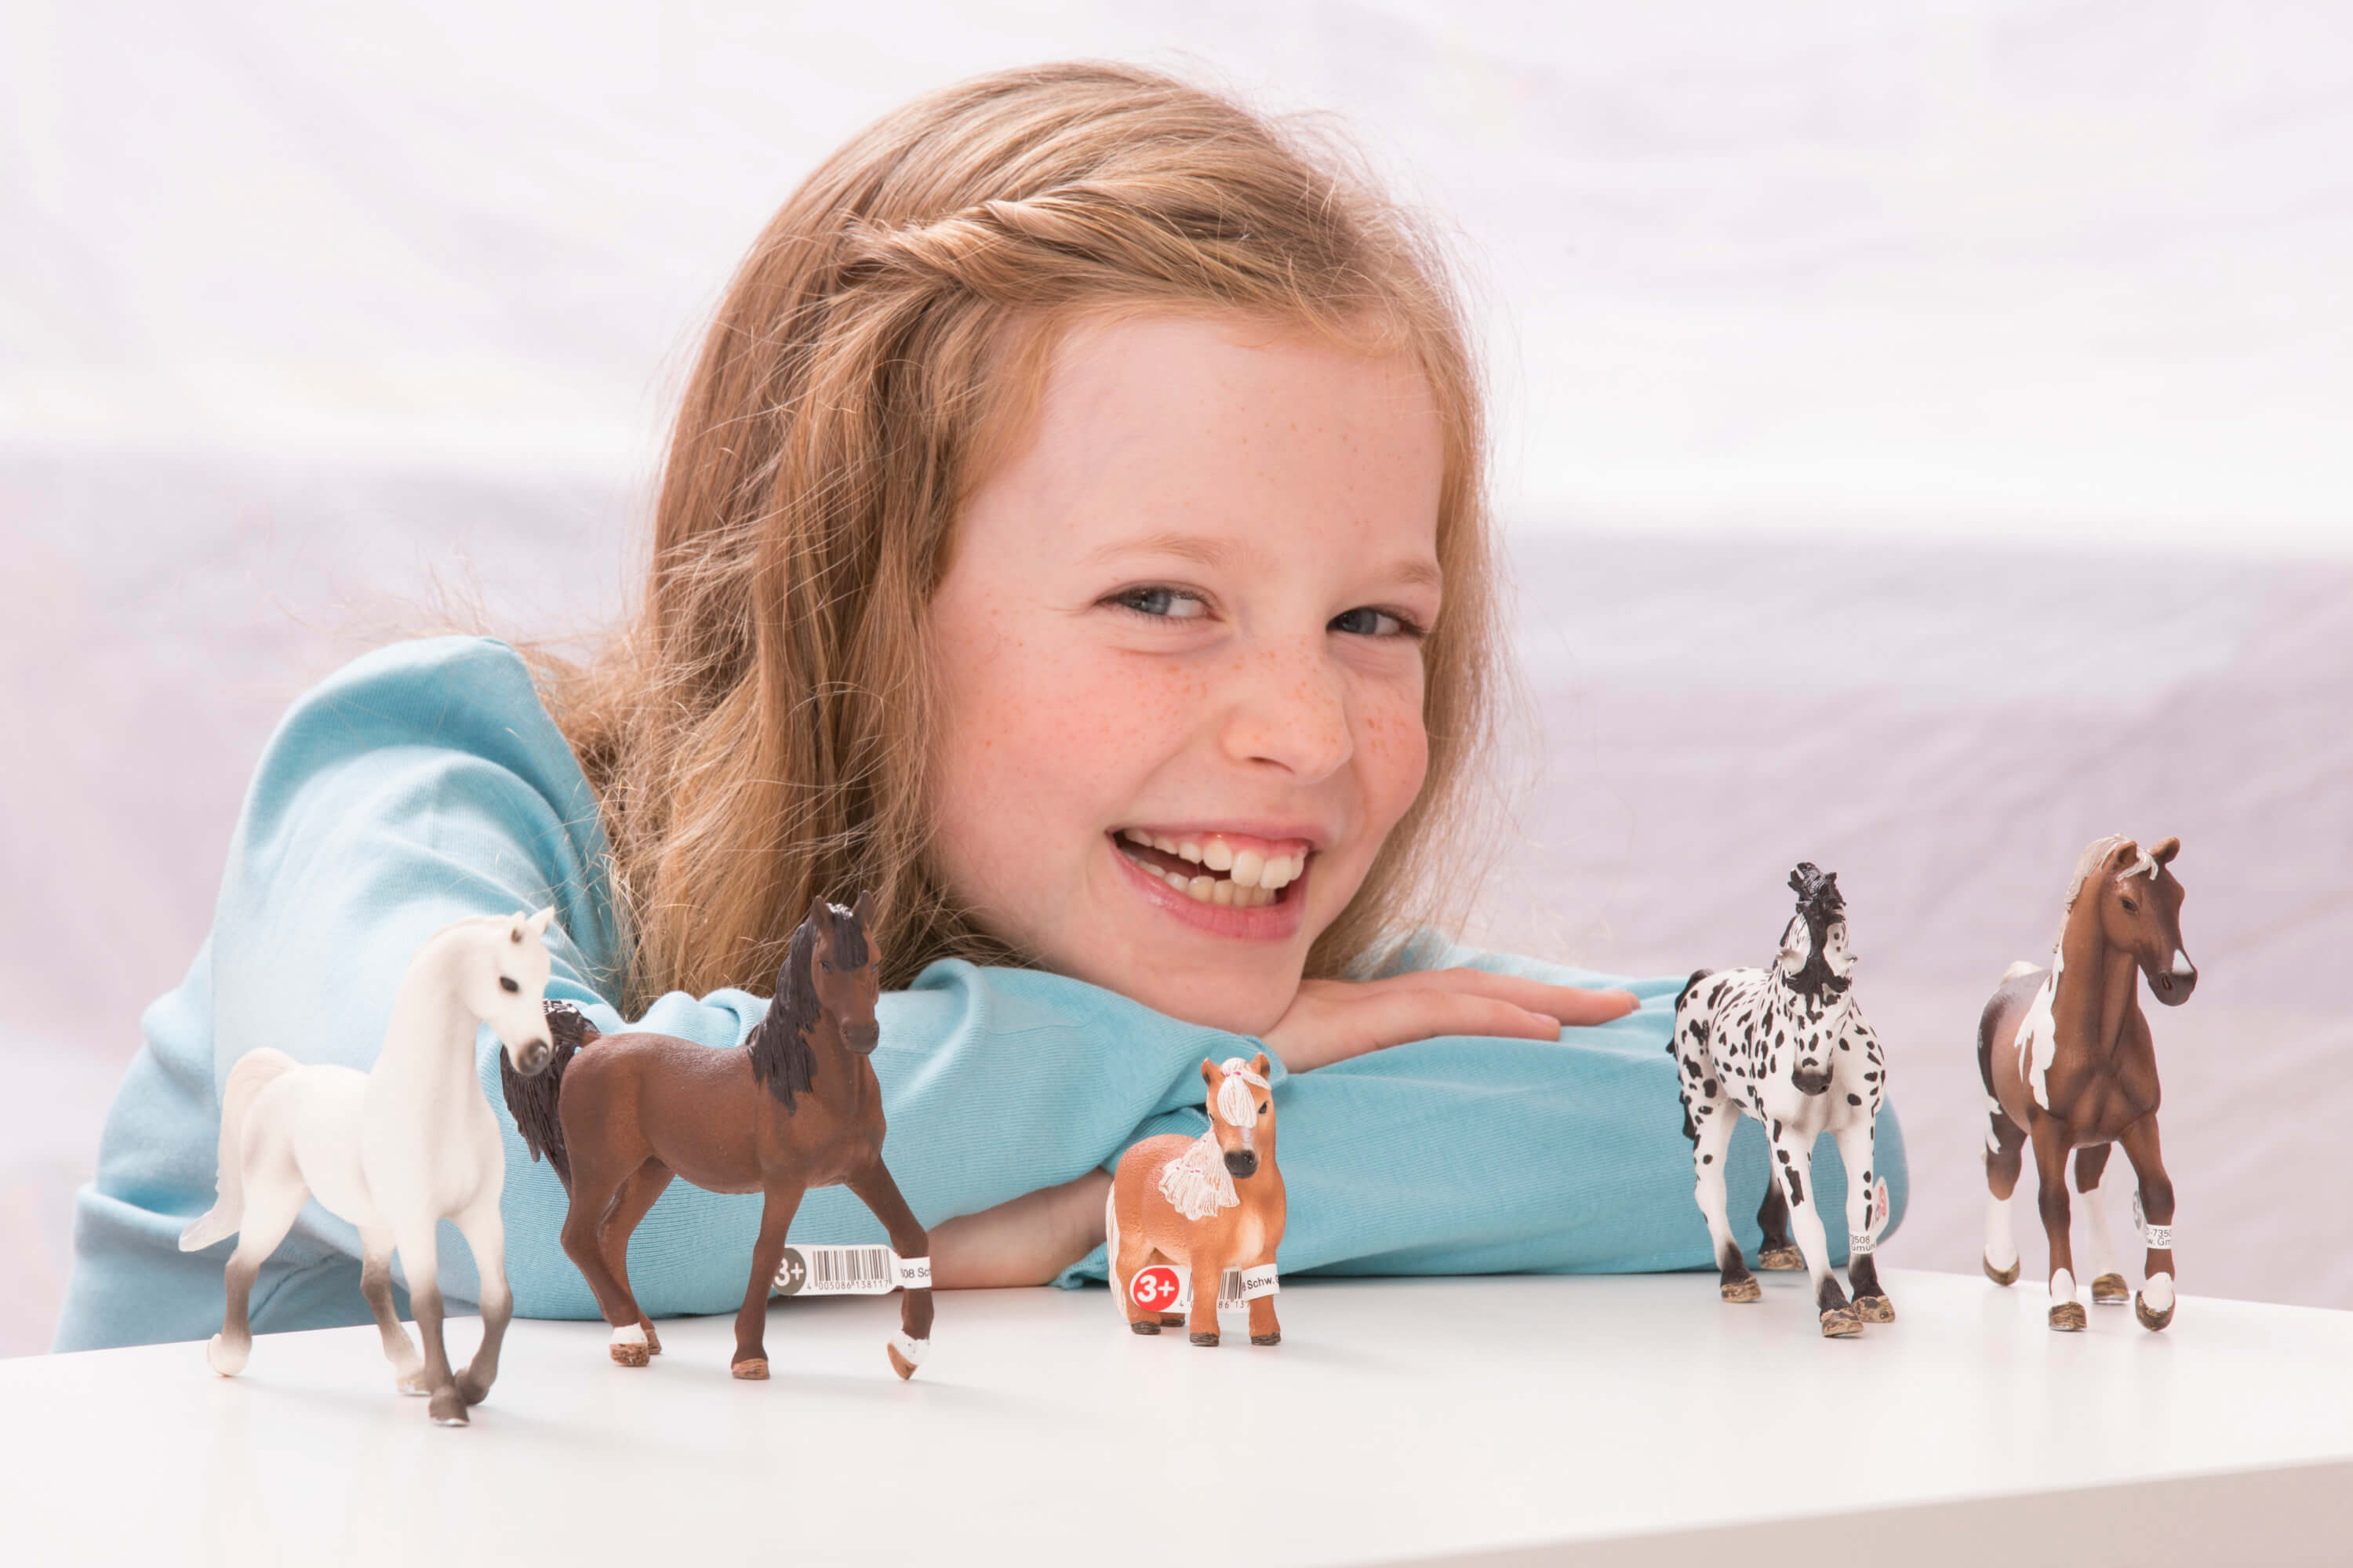 Schleich horse toys being played with by young girl.